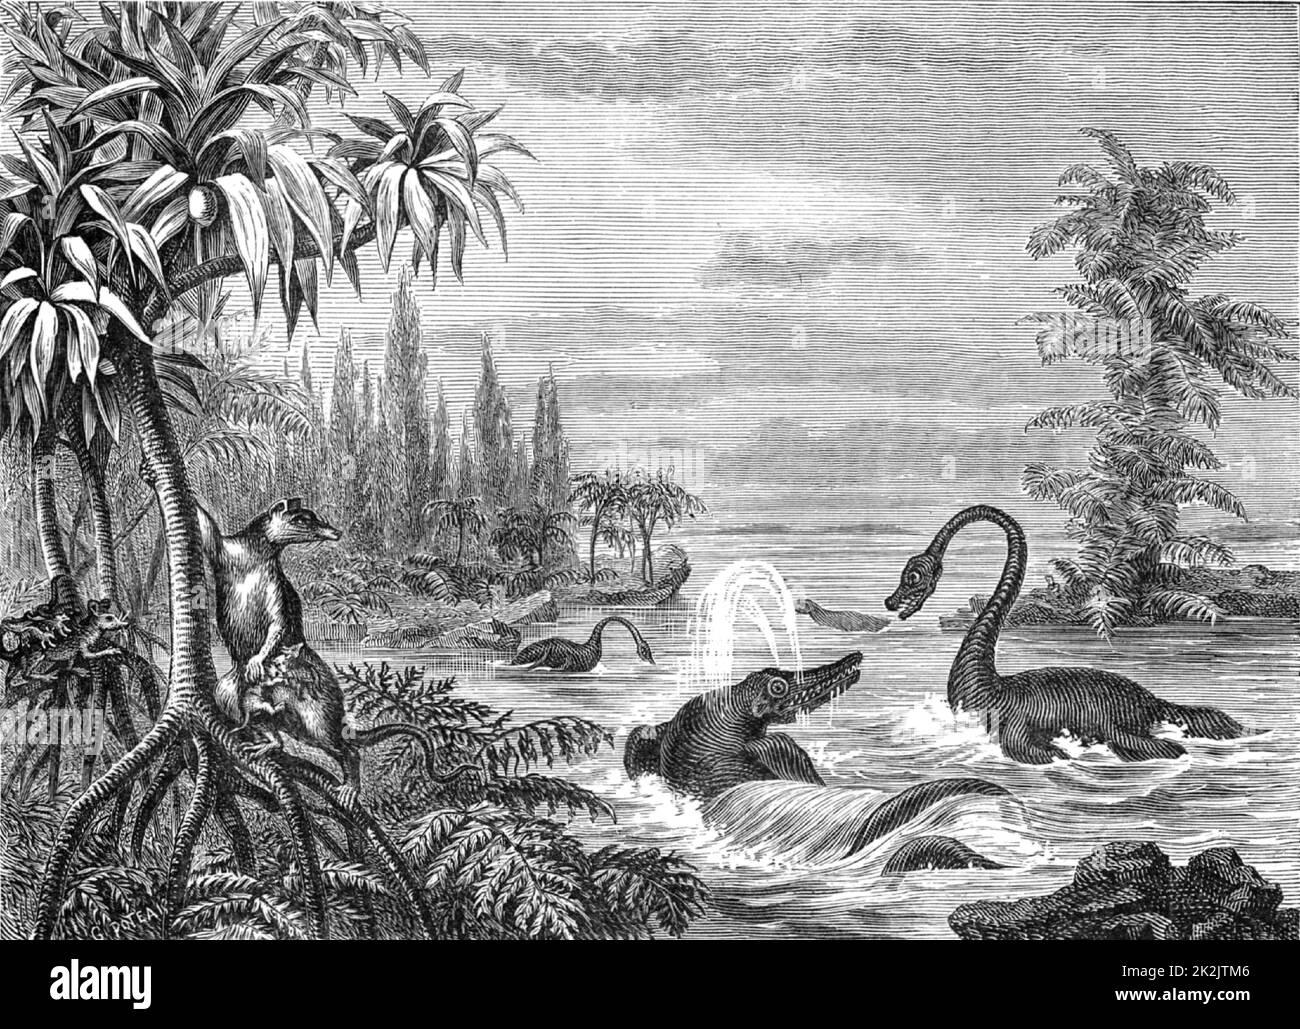 Scene during the Lower Oolite period showing reconstructions of Ichthyosaurus, Plesiosaurus and a Marsupial. From 'The Popular Encyclopaedia' (London, 1888). Engraving. Stock Photo